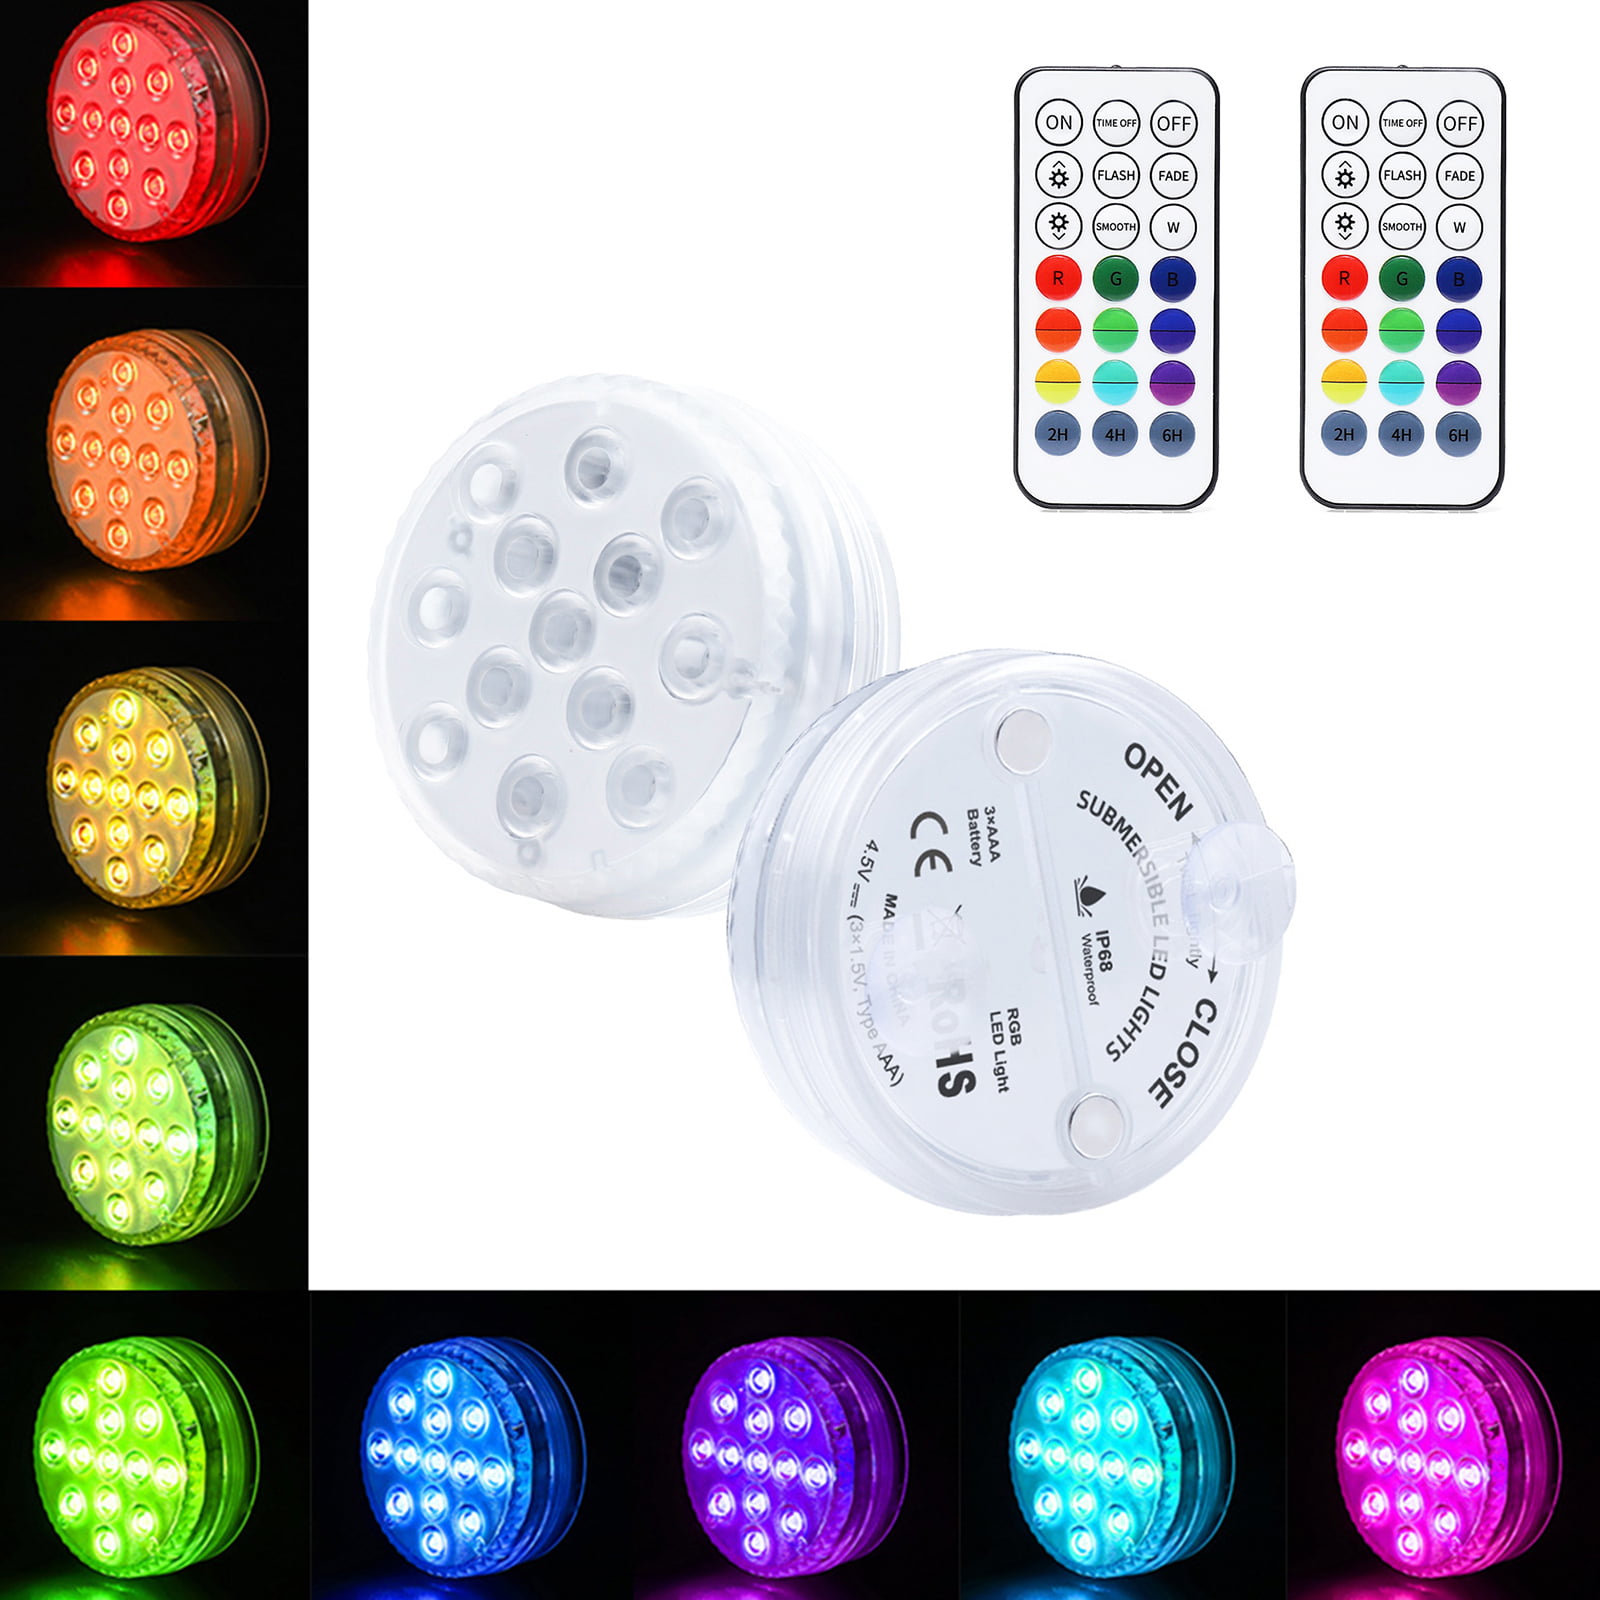 Details about   2x Remote Control Color 13 LED Light Boundery Waterproof EFX Accent Underwater 